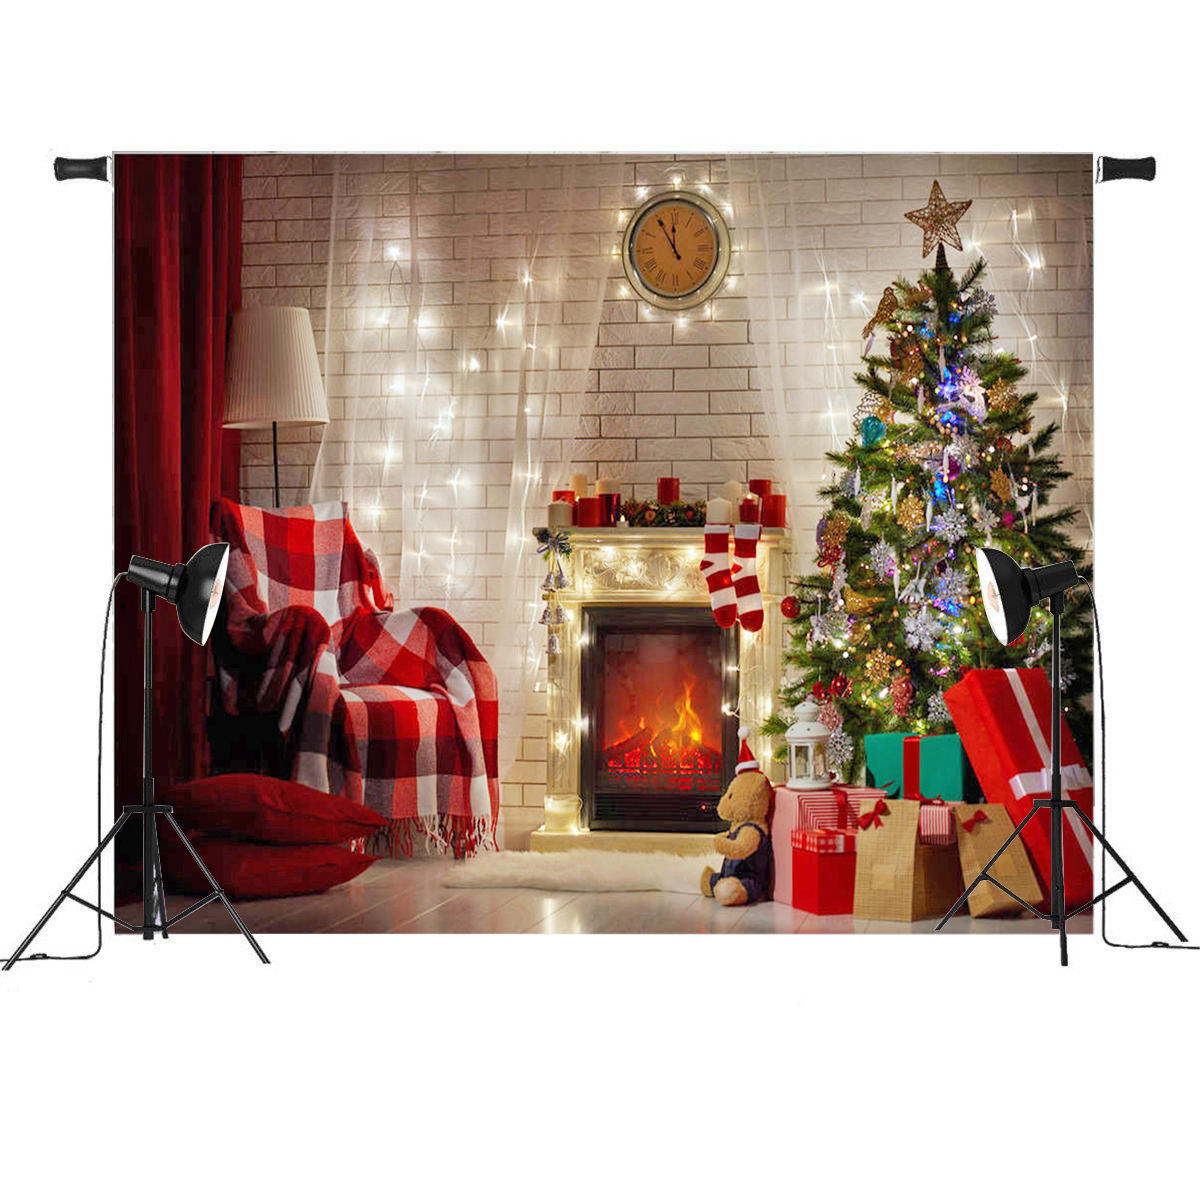 Fireplace Background Awesome 7x5ft Red Christmas Tree Gift Chair Fireplace Graphy Backdrop Studio Prop Background